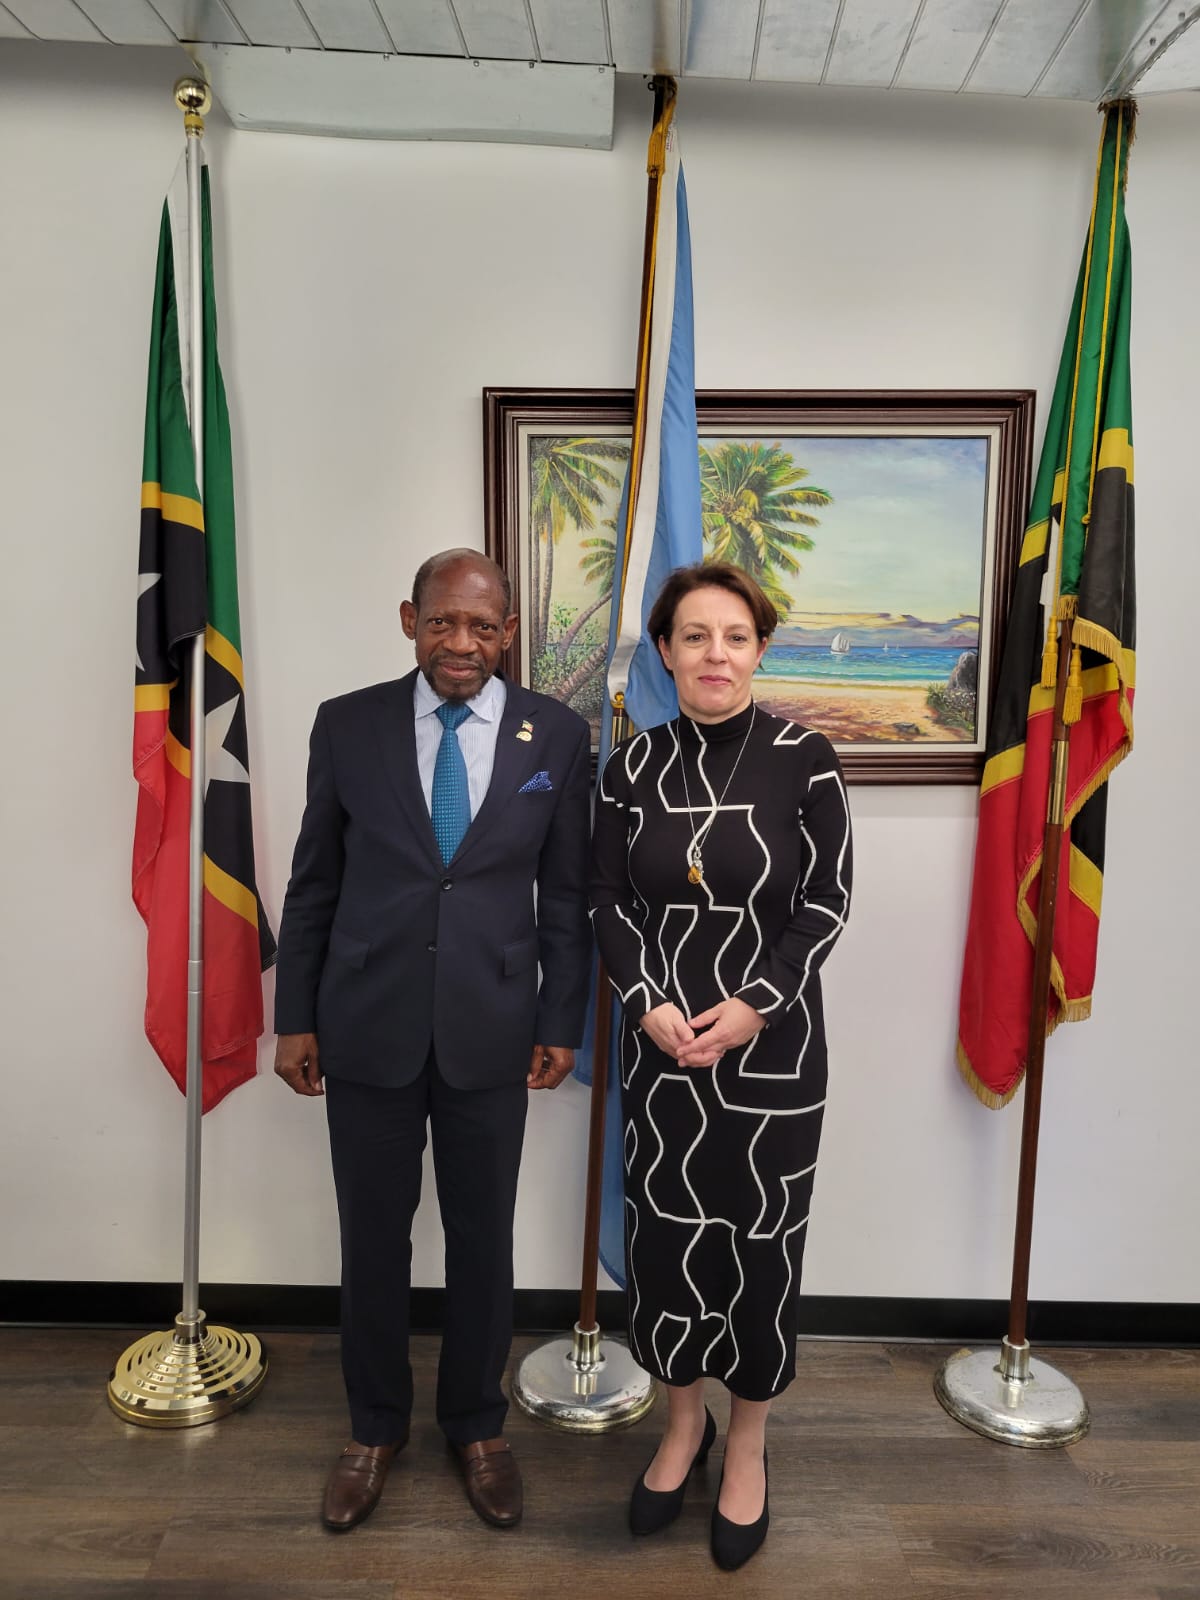 Saint Kitts and Nevis Leverages its Participation in the United Nations General Assembly to Strengthen its Bilateral Partnerships